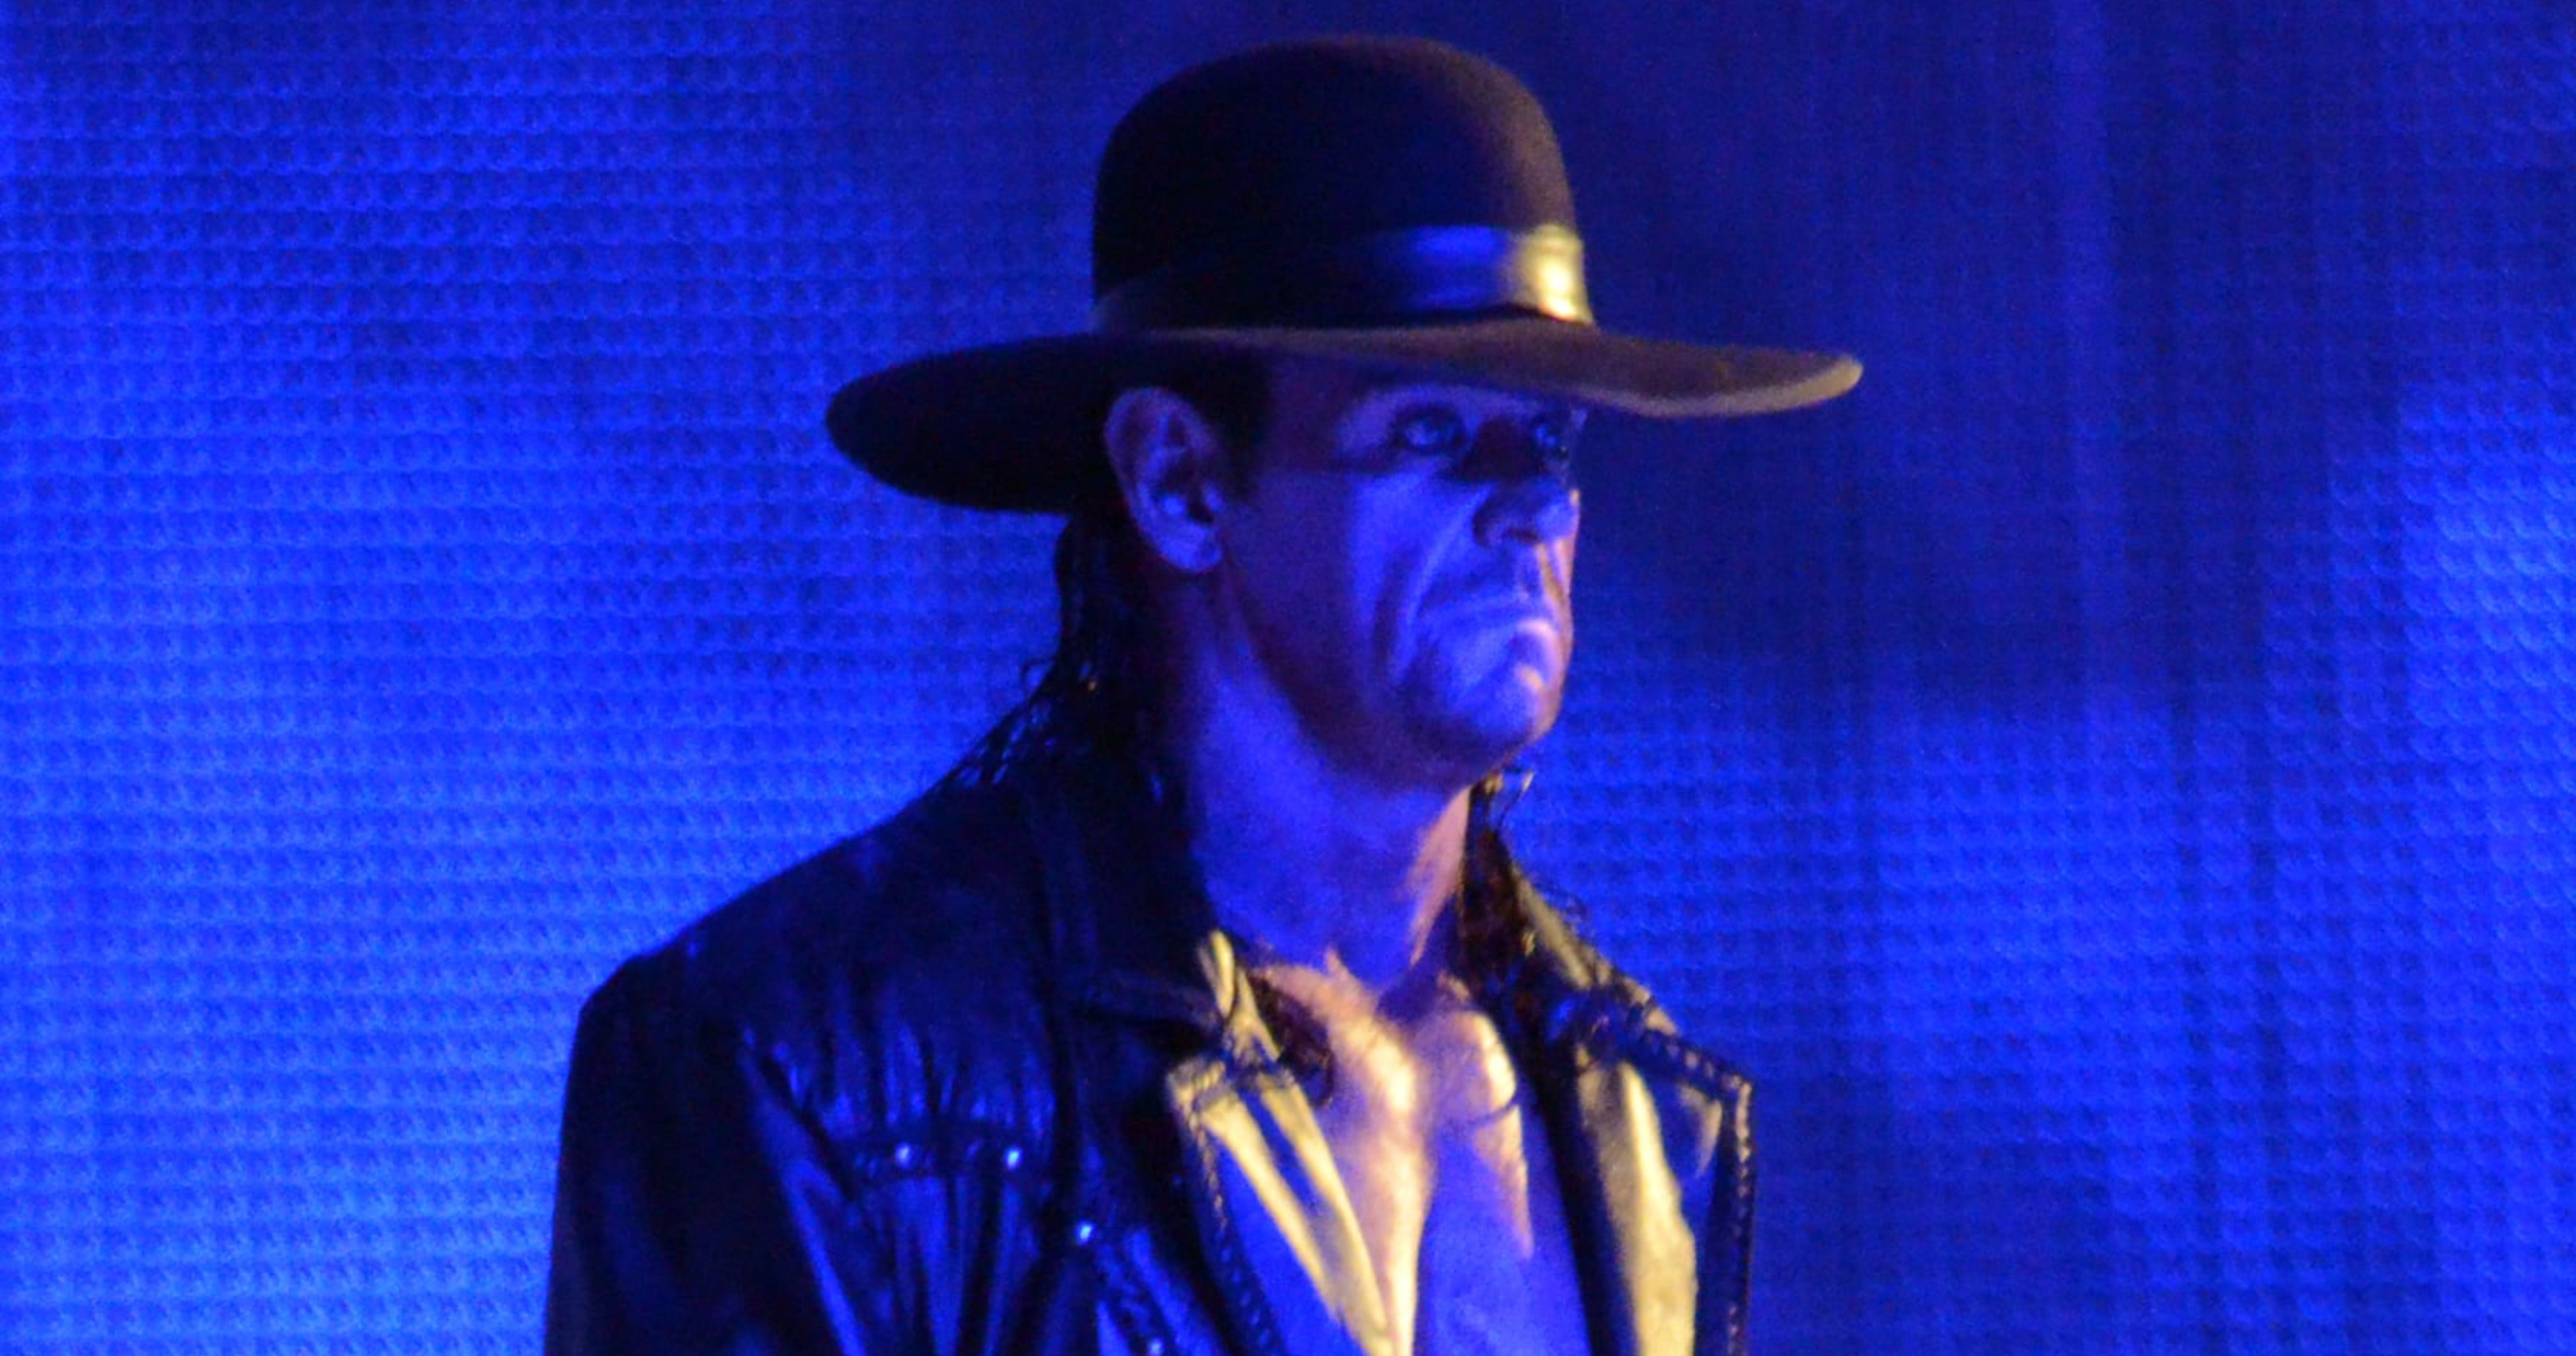 WWE Rumors: Undertaker Could Be on NXT Card amid John Cena, Cody Rhodes Appearances